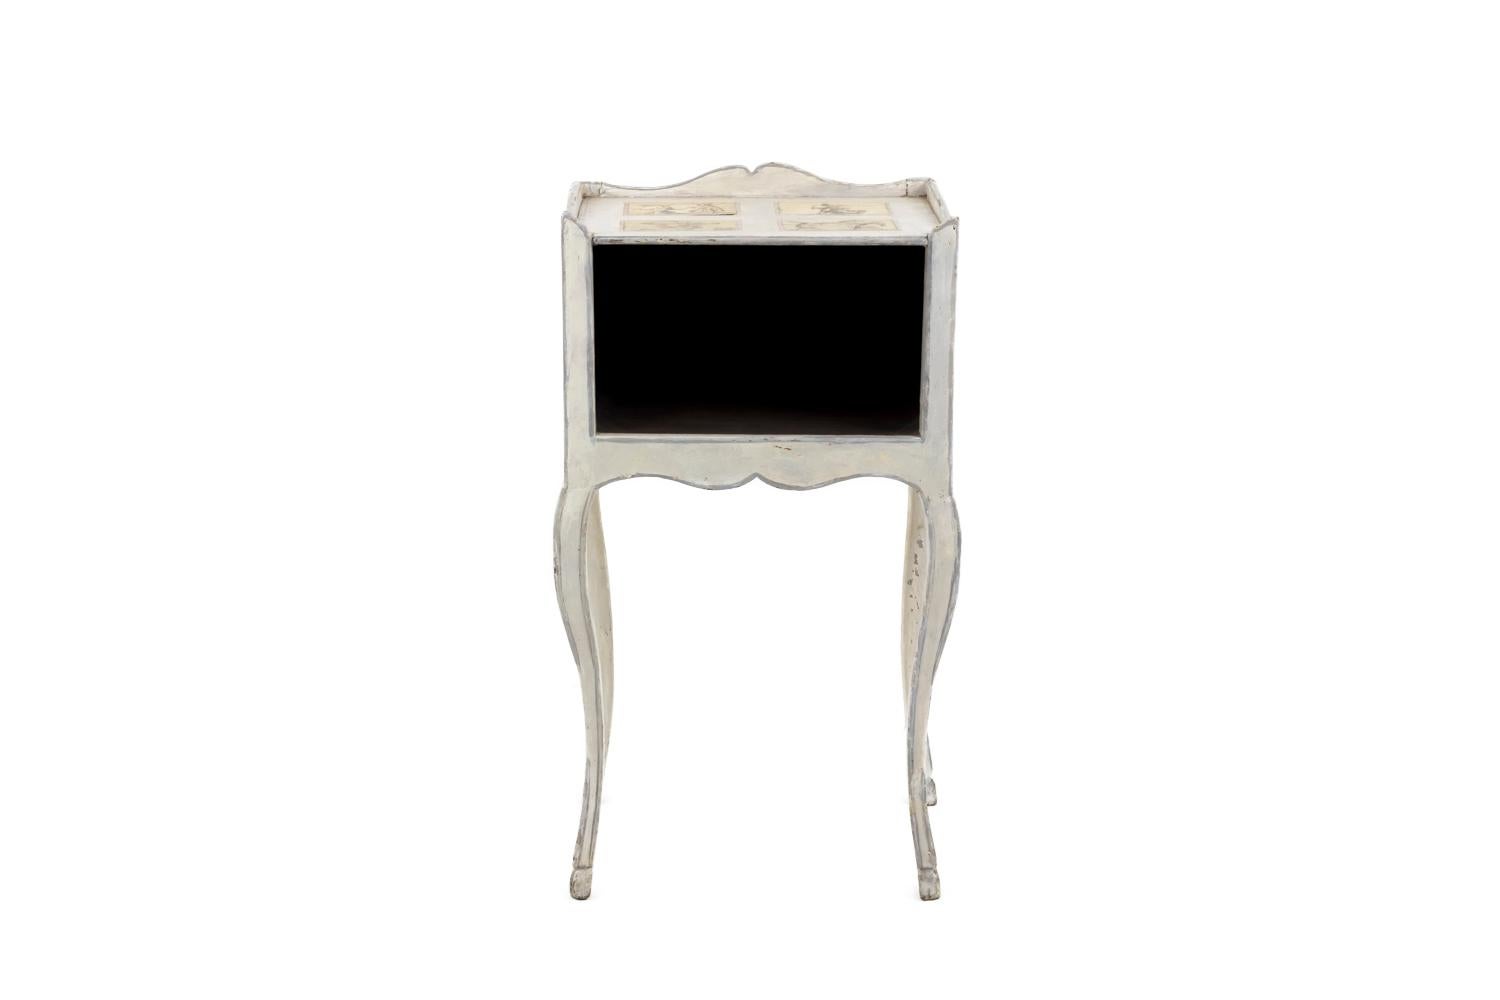 Louis XV period bedside table in white lacquered wood standing on four cabriole legs and front opened with a compartment.
Scalloped apron and tray edge.
Decor of caricatures stuck on the tray, on sides and on the back figuring men fights, a drunk